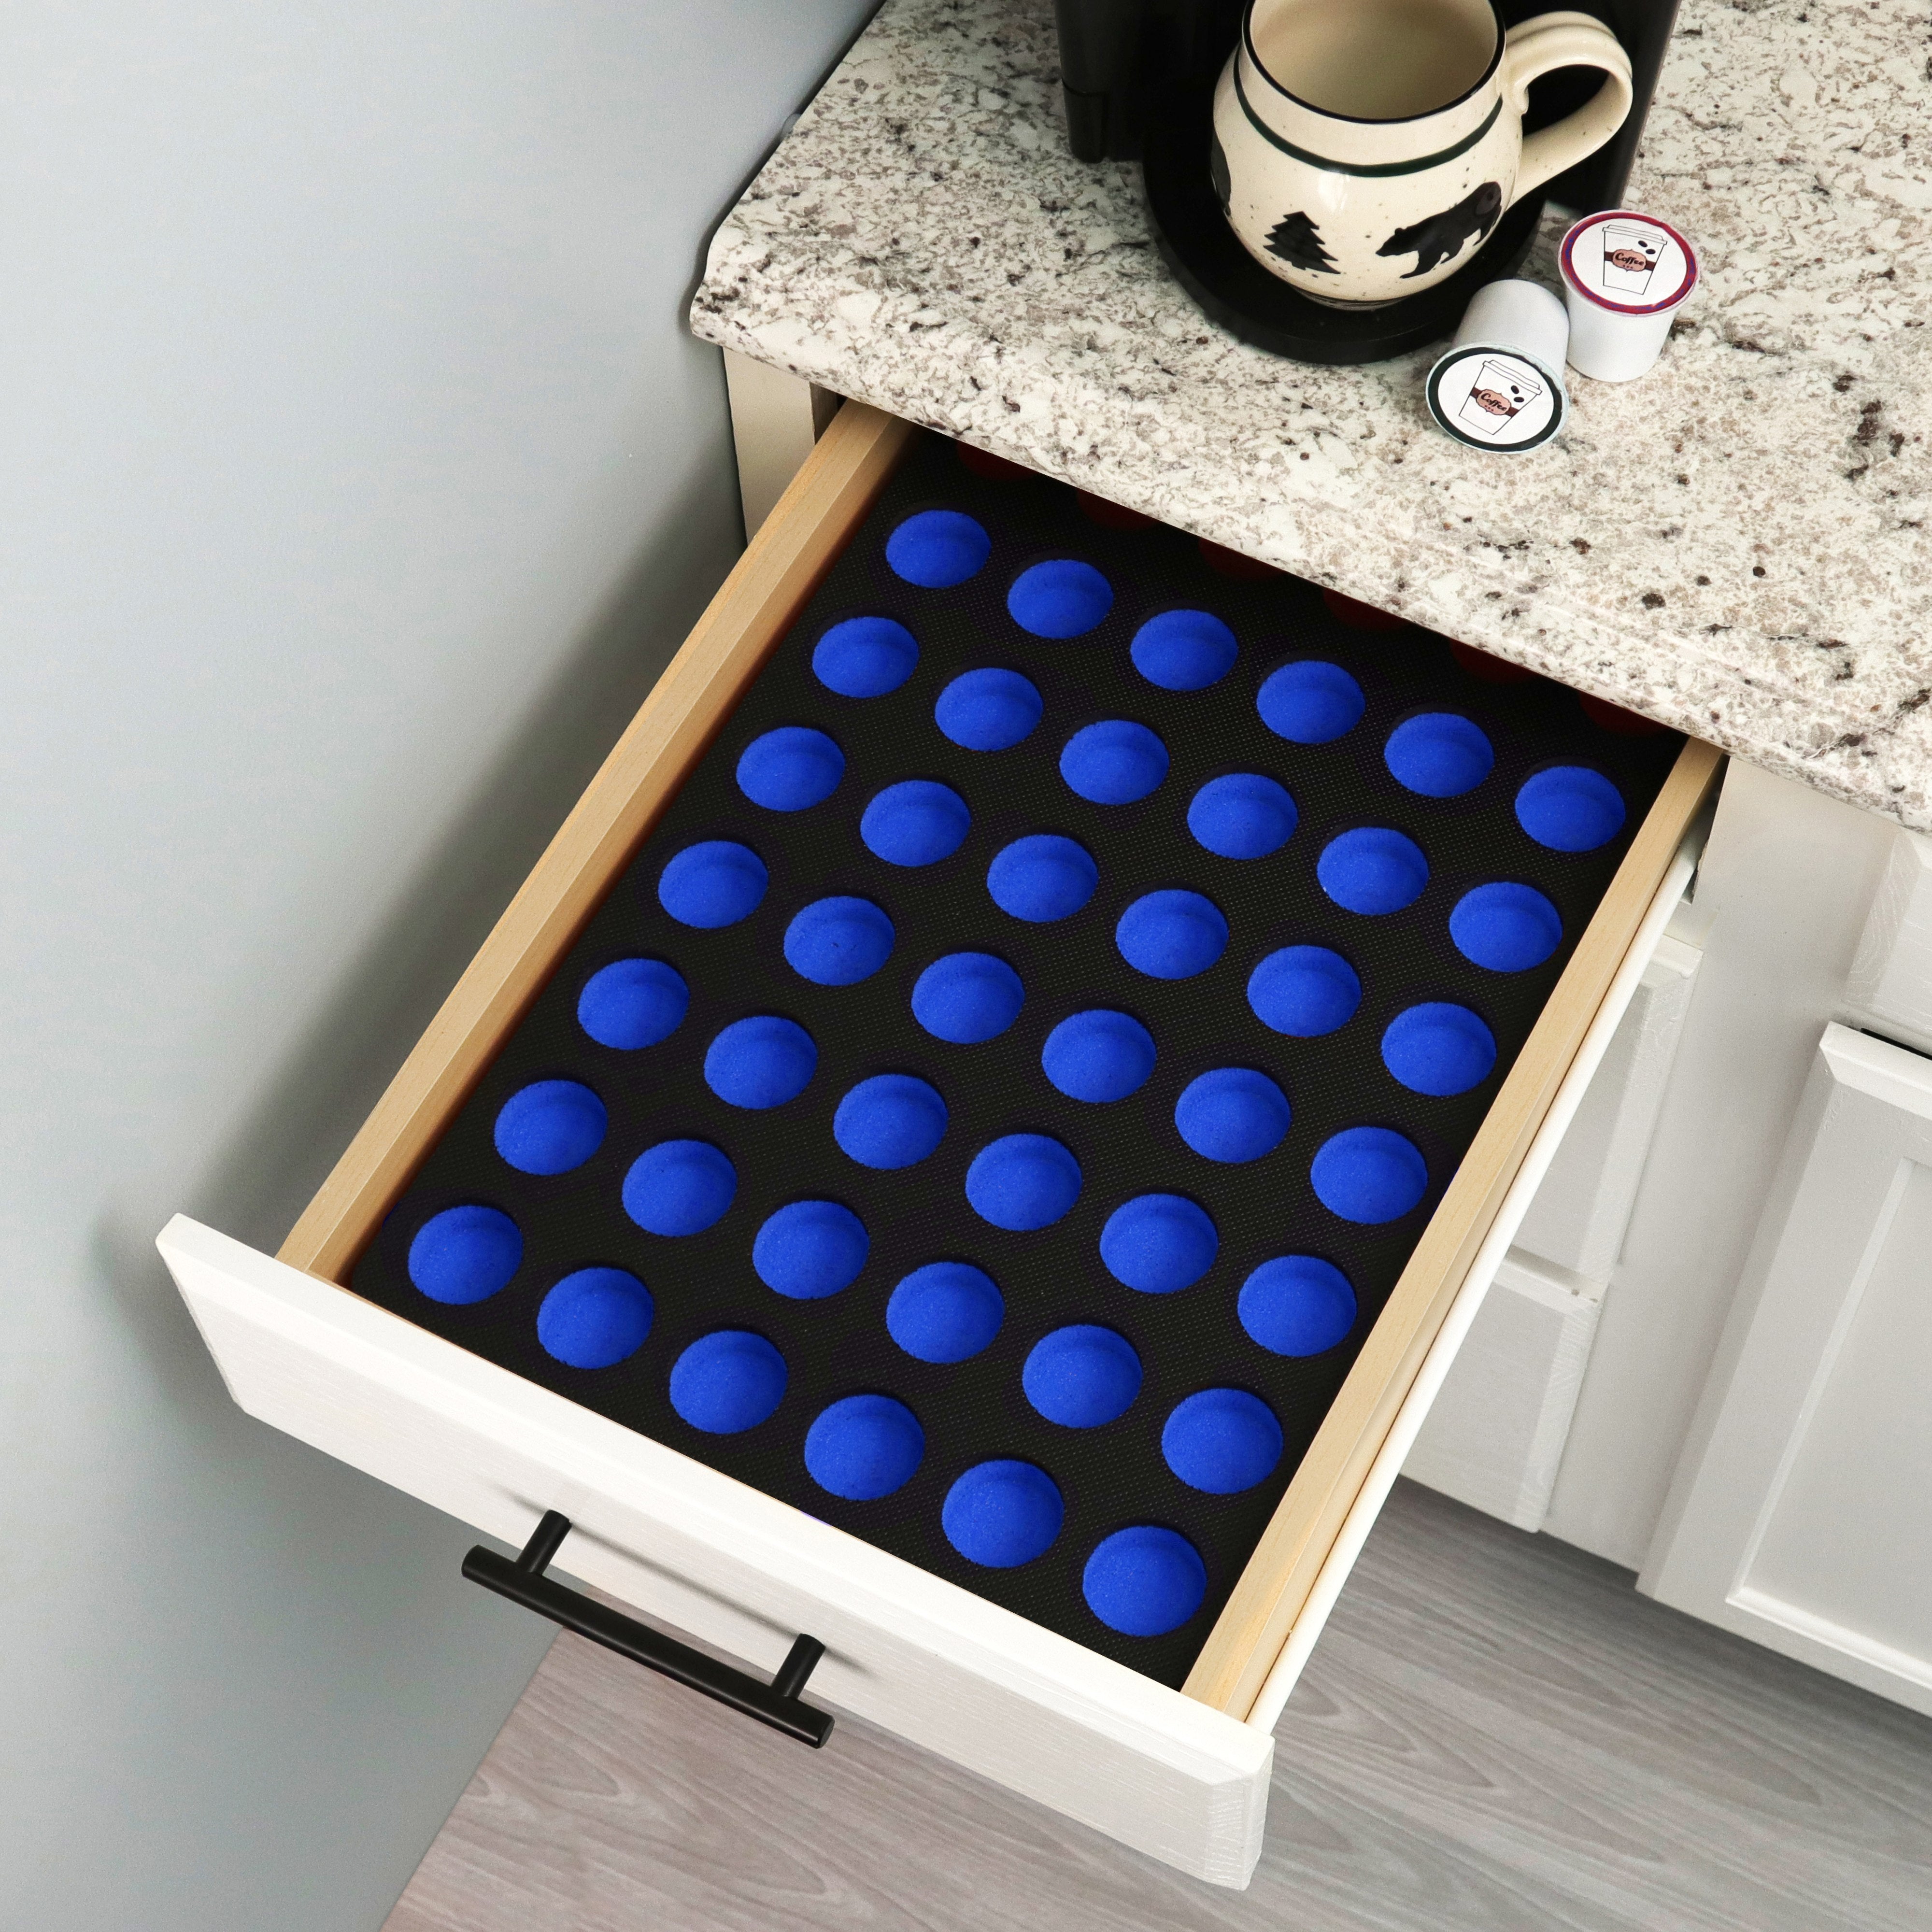 Coffee Pod Storage Deluxe Organizer Tray Drawer Insert for Kitchen Home Office Waterproof 12.6 X 17.9 Inches Holds 48 Compatible Keurig K-Cup